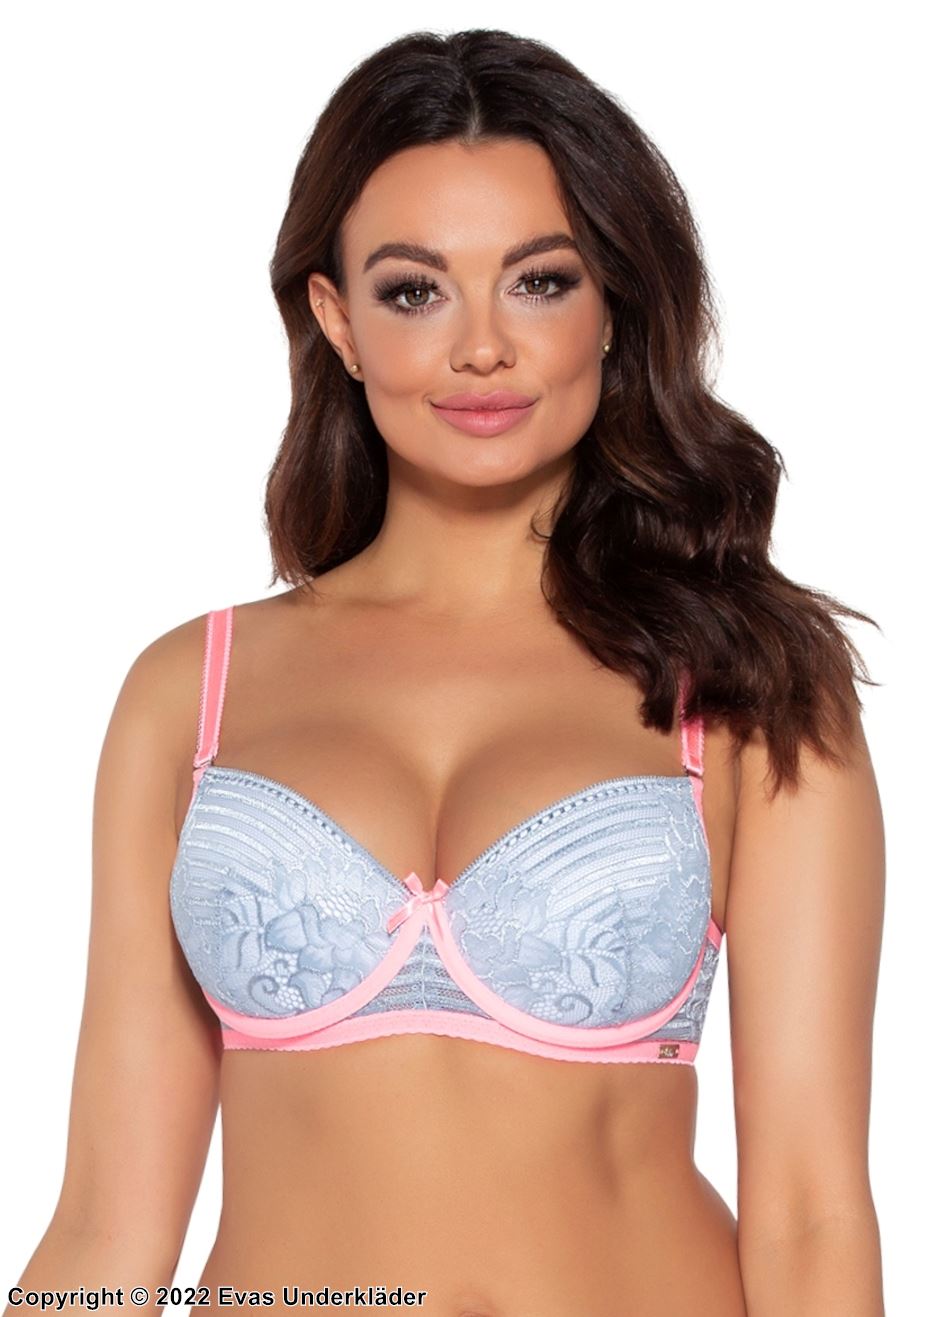 Exclusive push-up bra, floral lace, cheerful color